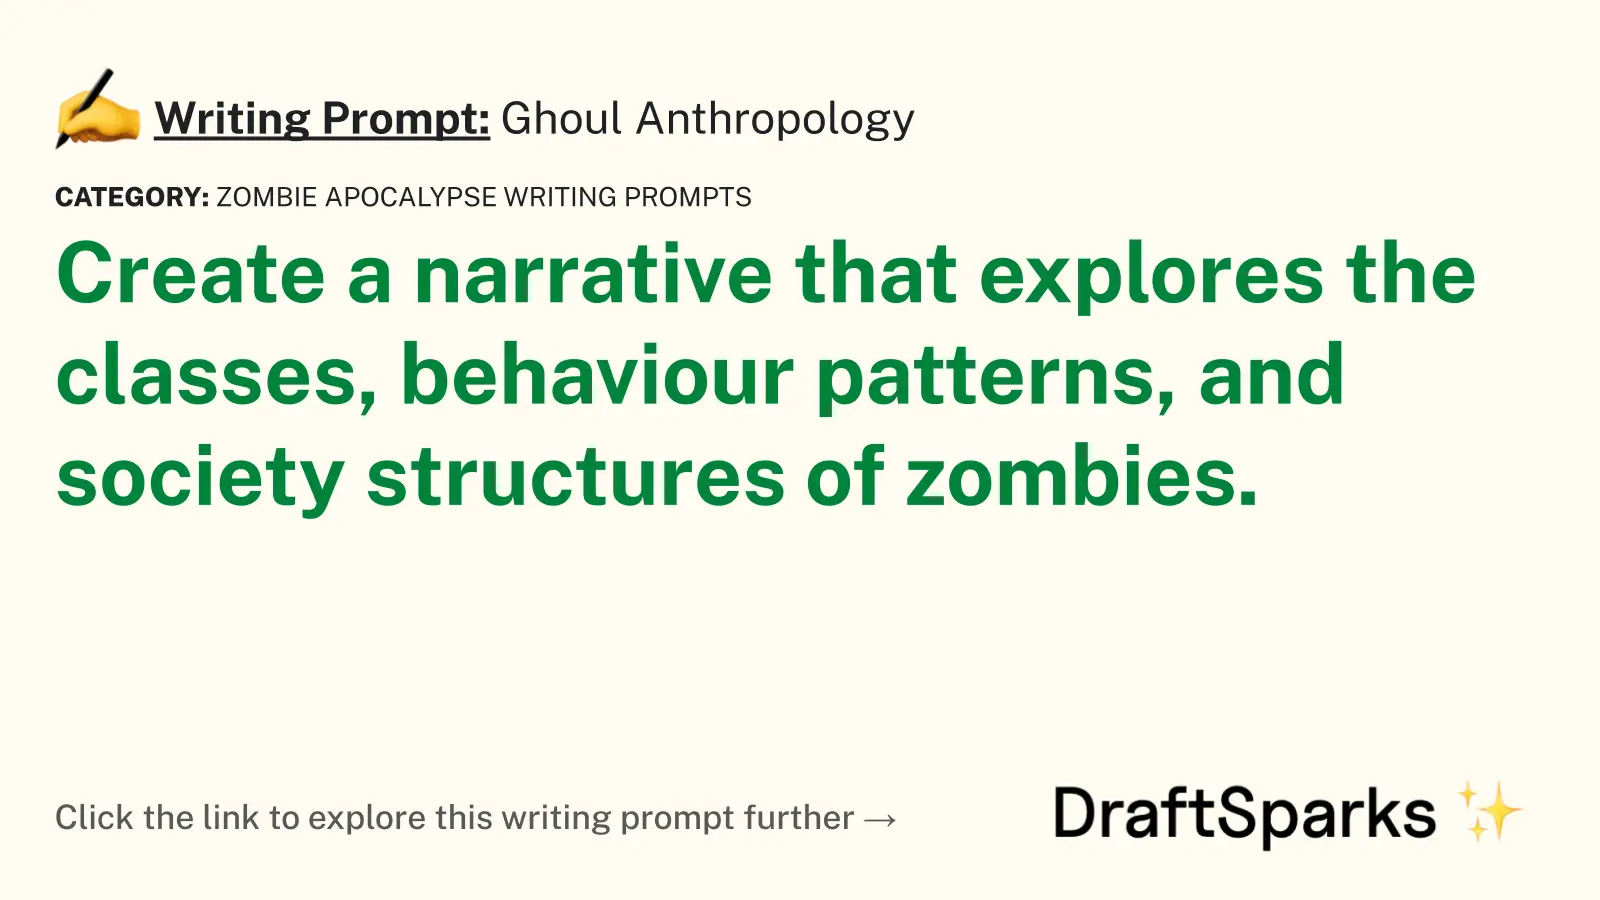 Ghoul Anthropology